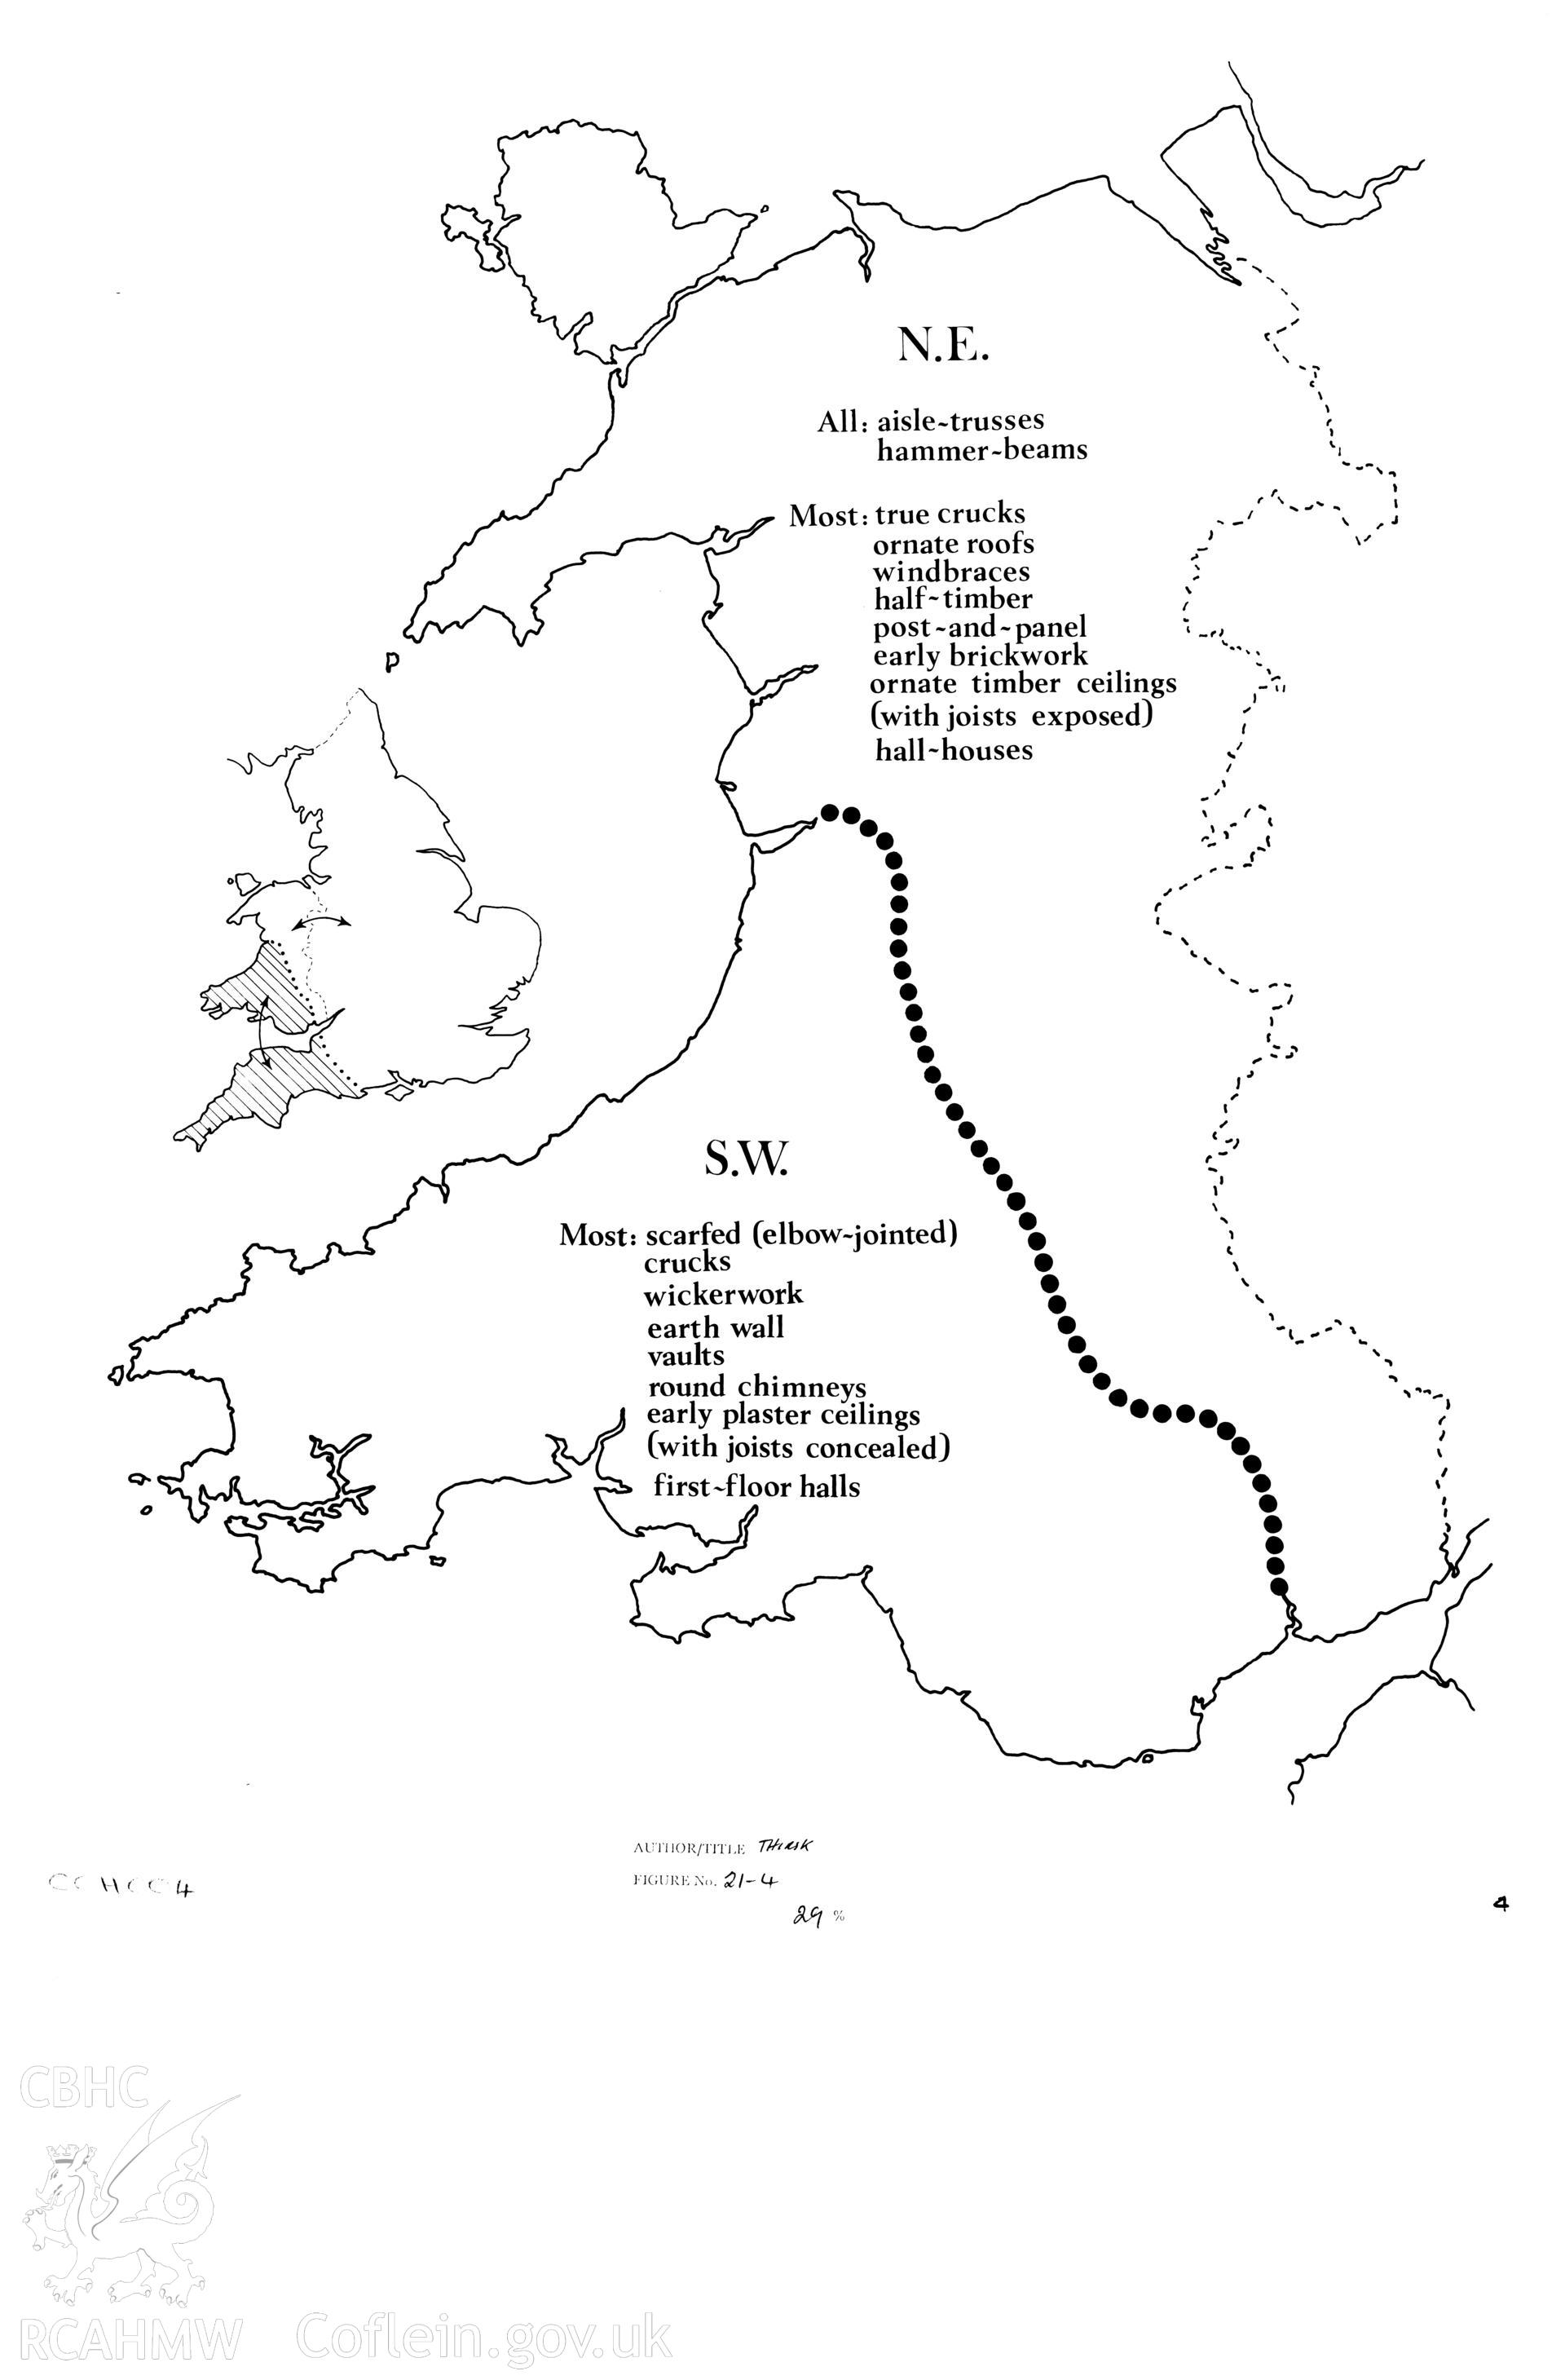 Volume 3, Figure 53: Map showing 'Welsh building regions contrasting NE and SW'.